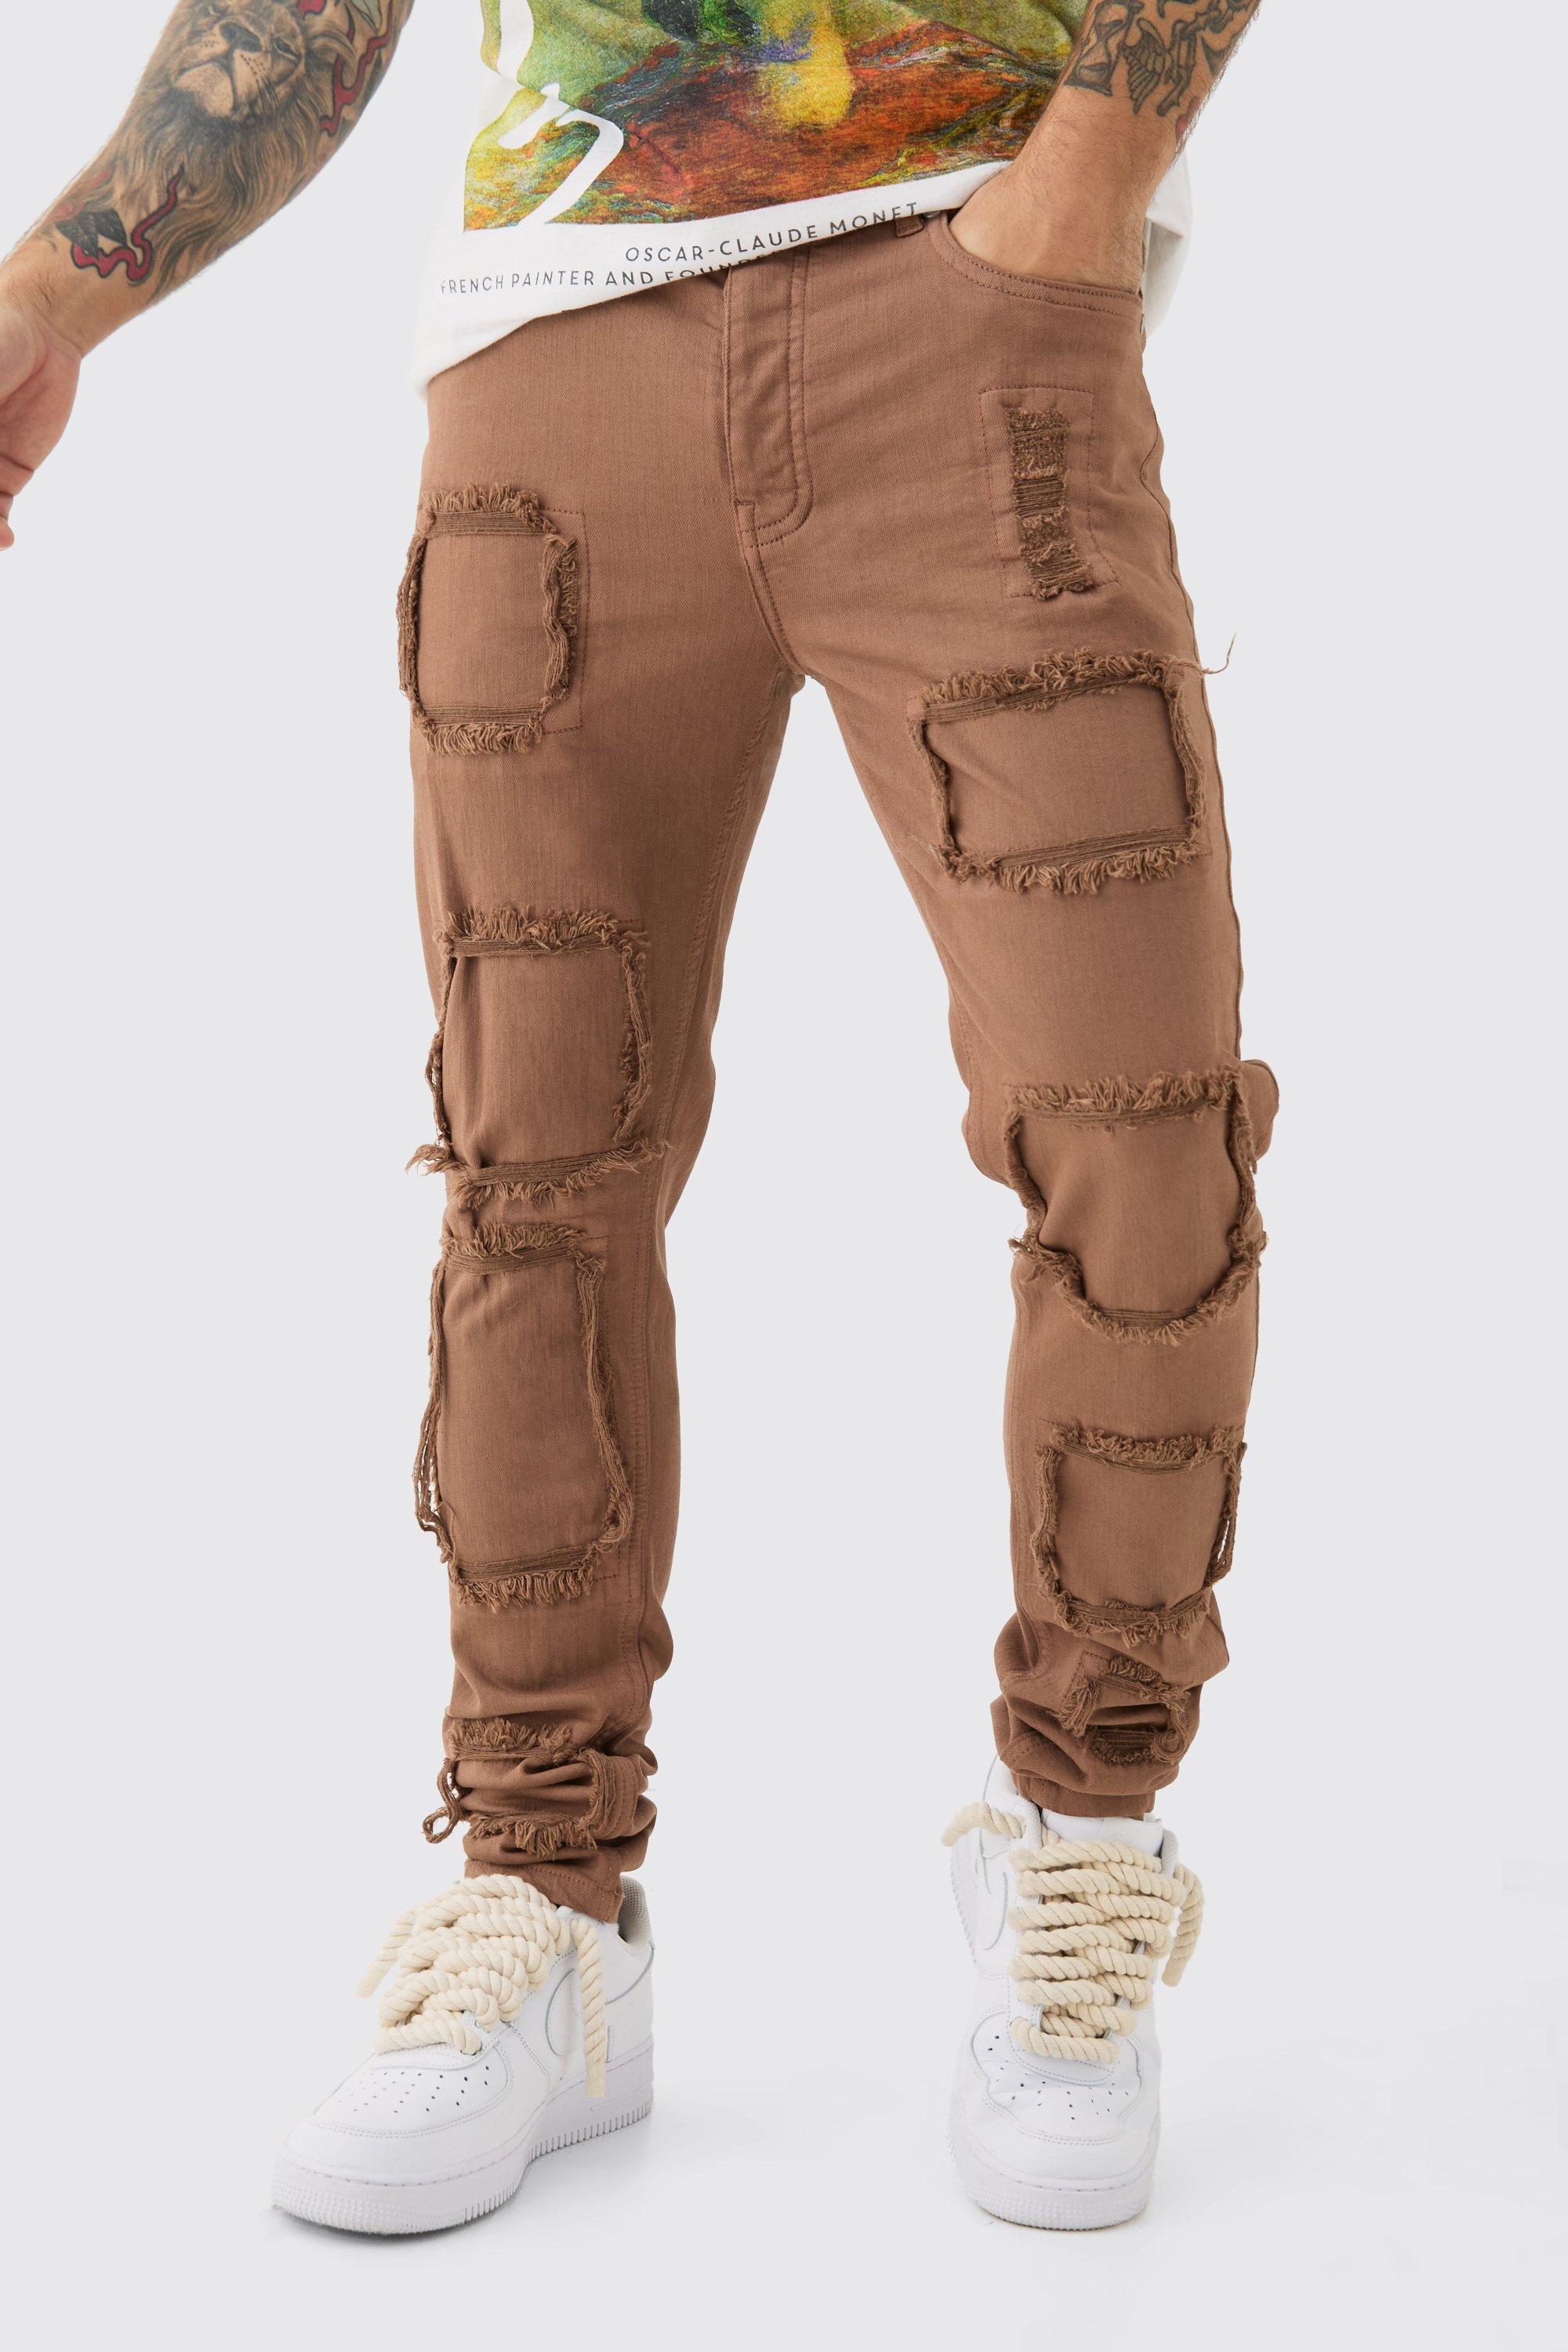 Image of Skinny Stretch Distressed Rip & Repair Jeans In Stone Wash, Beige